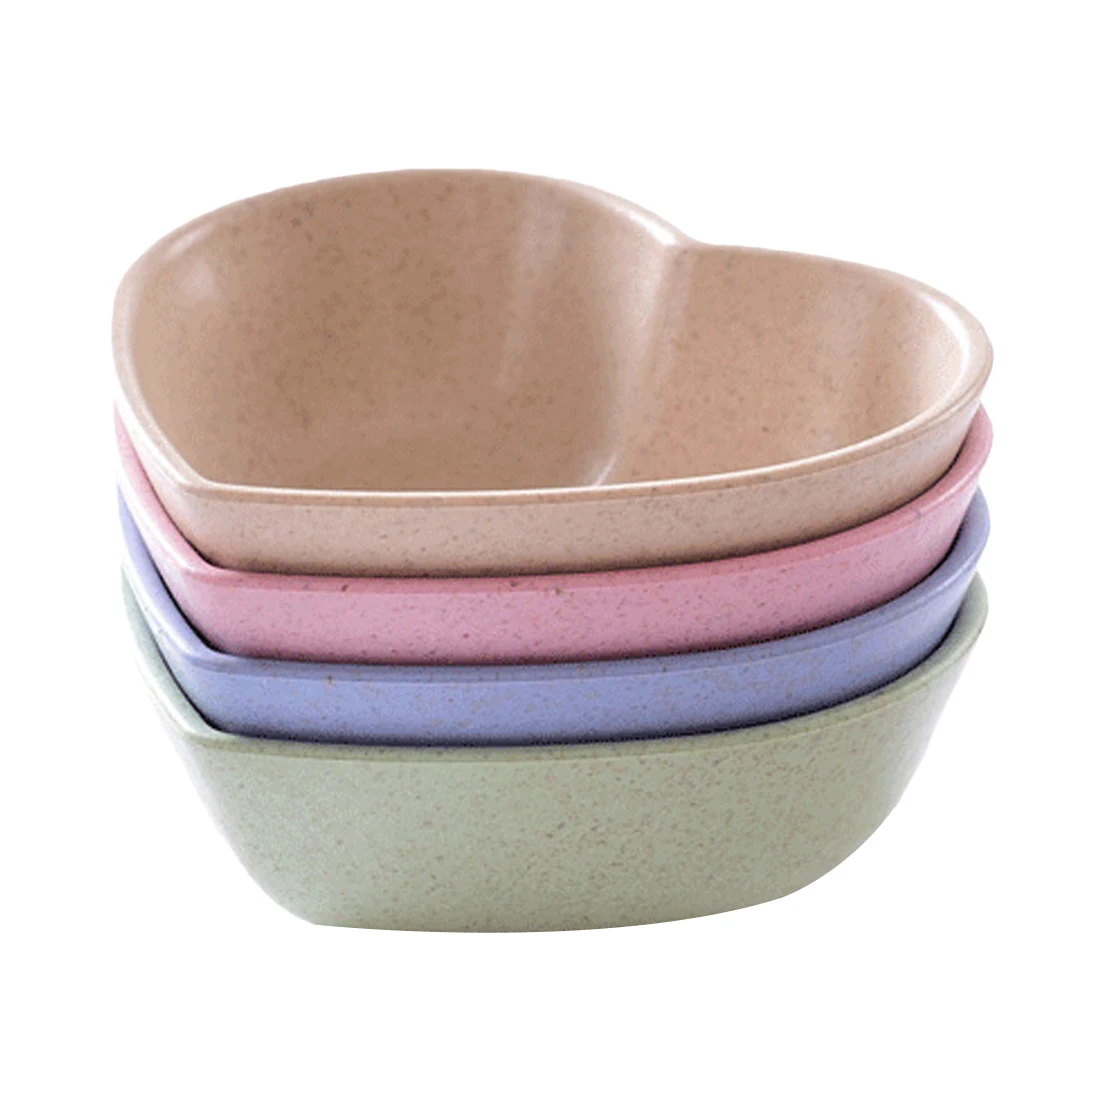 Tableware Bowl Heart Shape Lightweight Seasoning Bowl Food Sauce Kitchen Accessories Dish Appetizer Plates for Kitchen tools